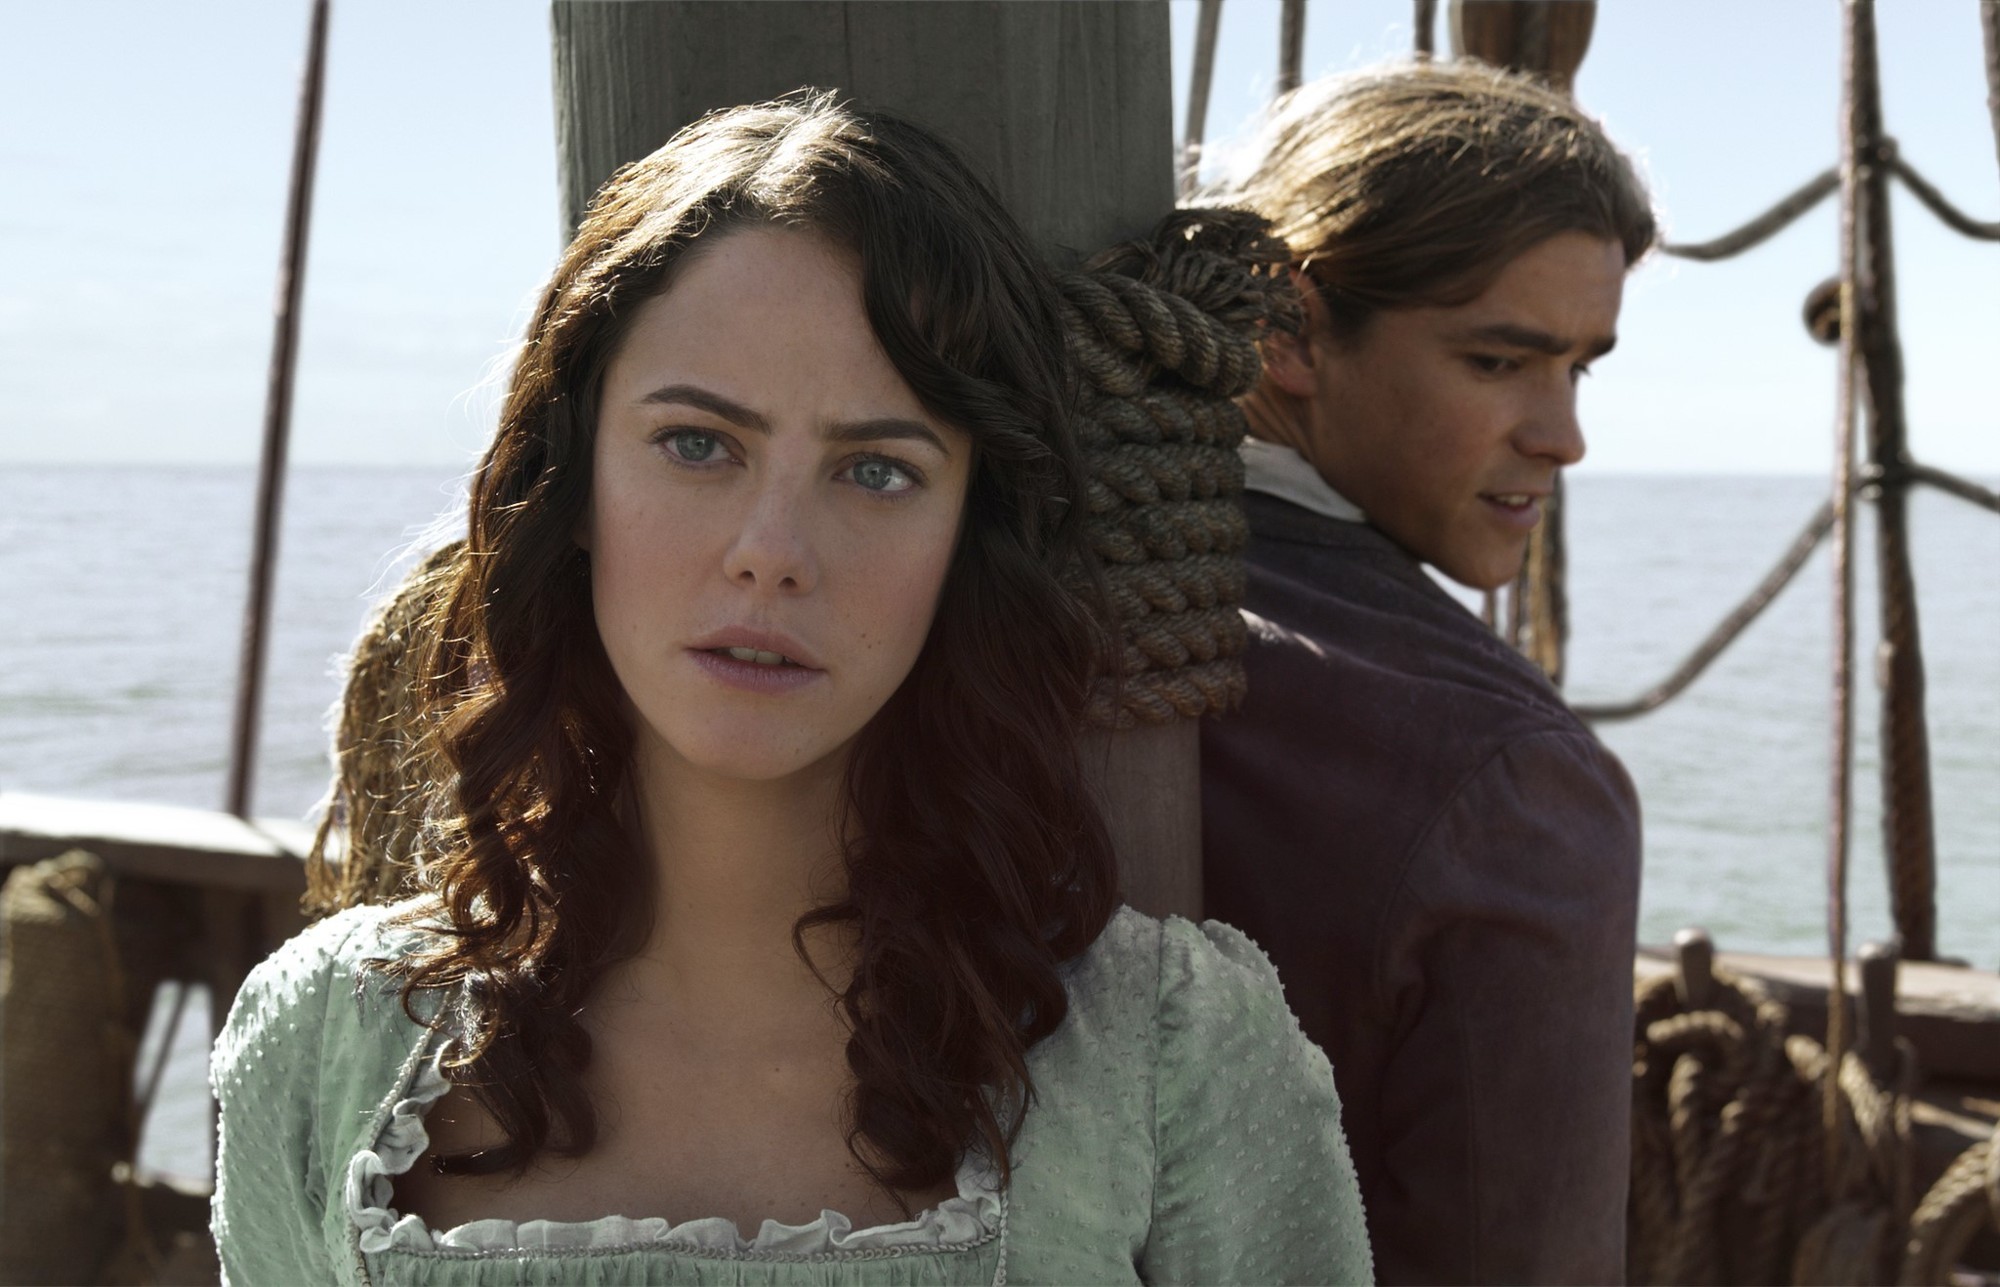 Kaya Scodelario stars as Carina Smyth and Brenton Thwaites stars as Henry Turner in Walt Disney Pictures' Pirates of the Caribbean: Dead Men Tell No Tales (2017)